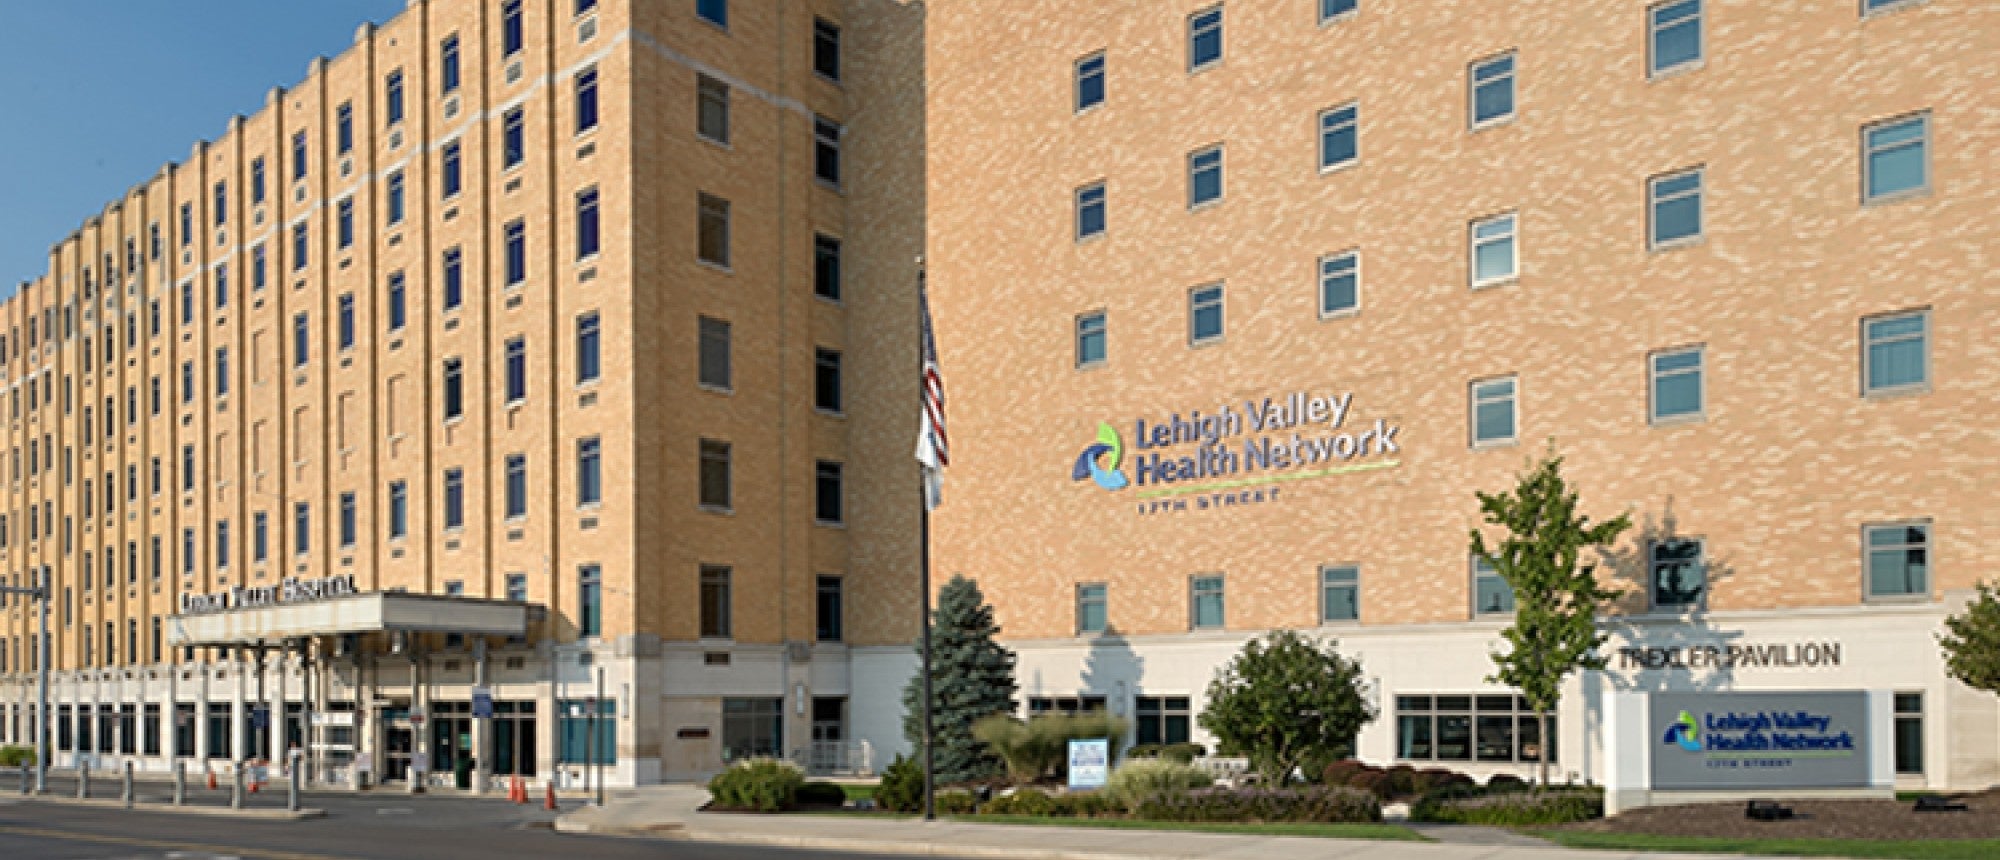 Diagnostic Care Center at Lehigh Valley Hospital–17th Street